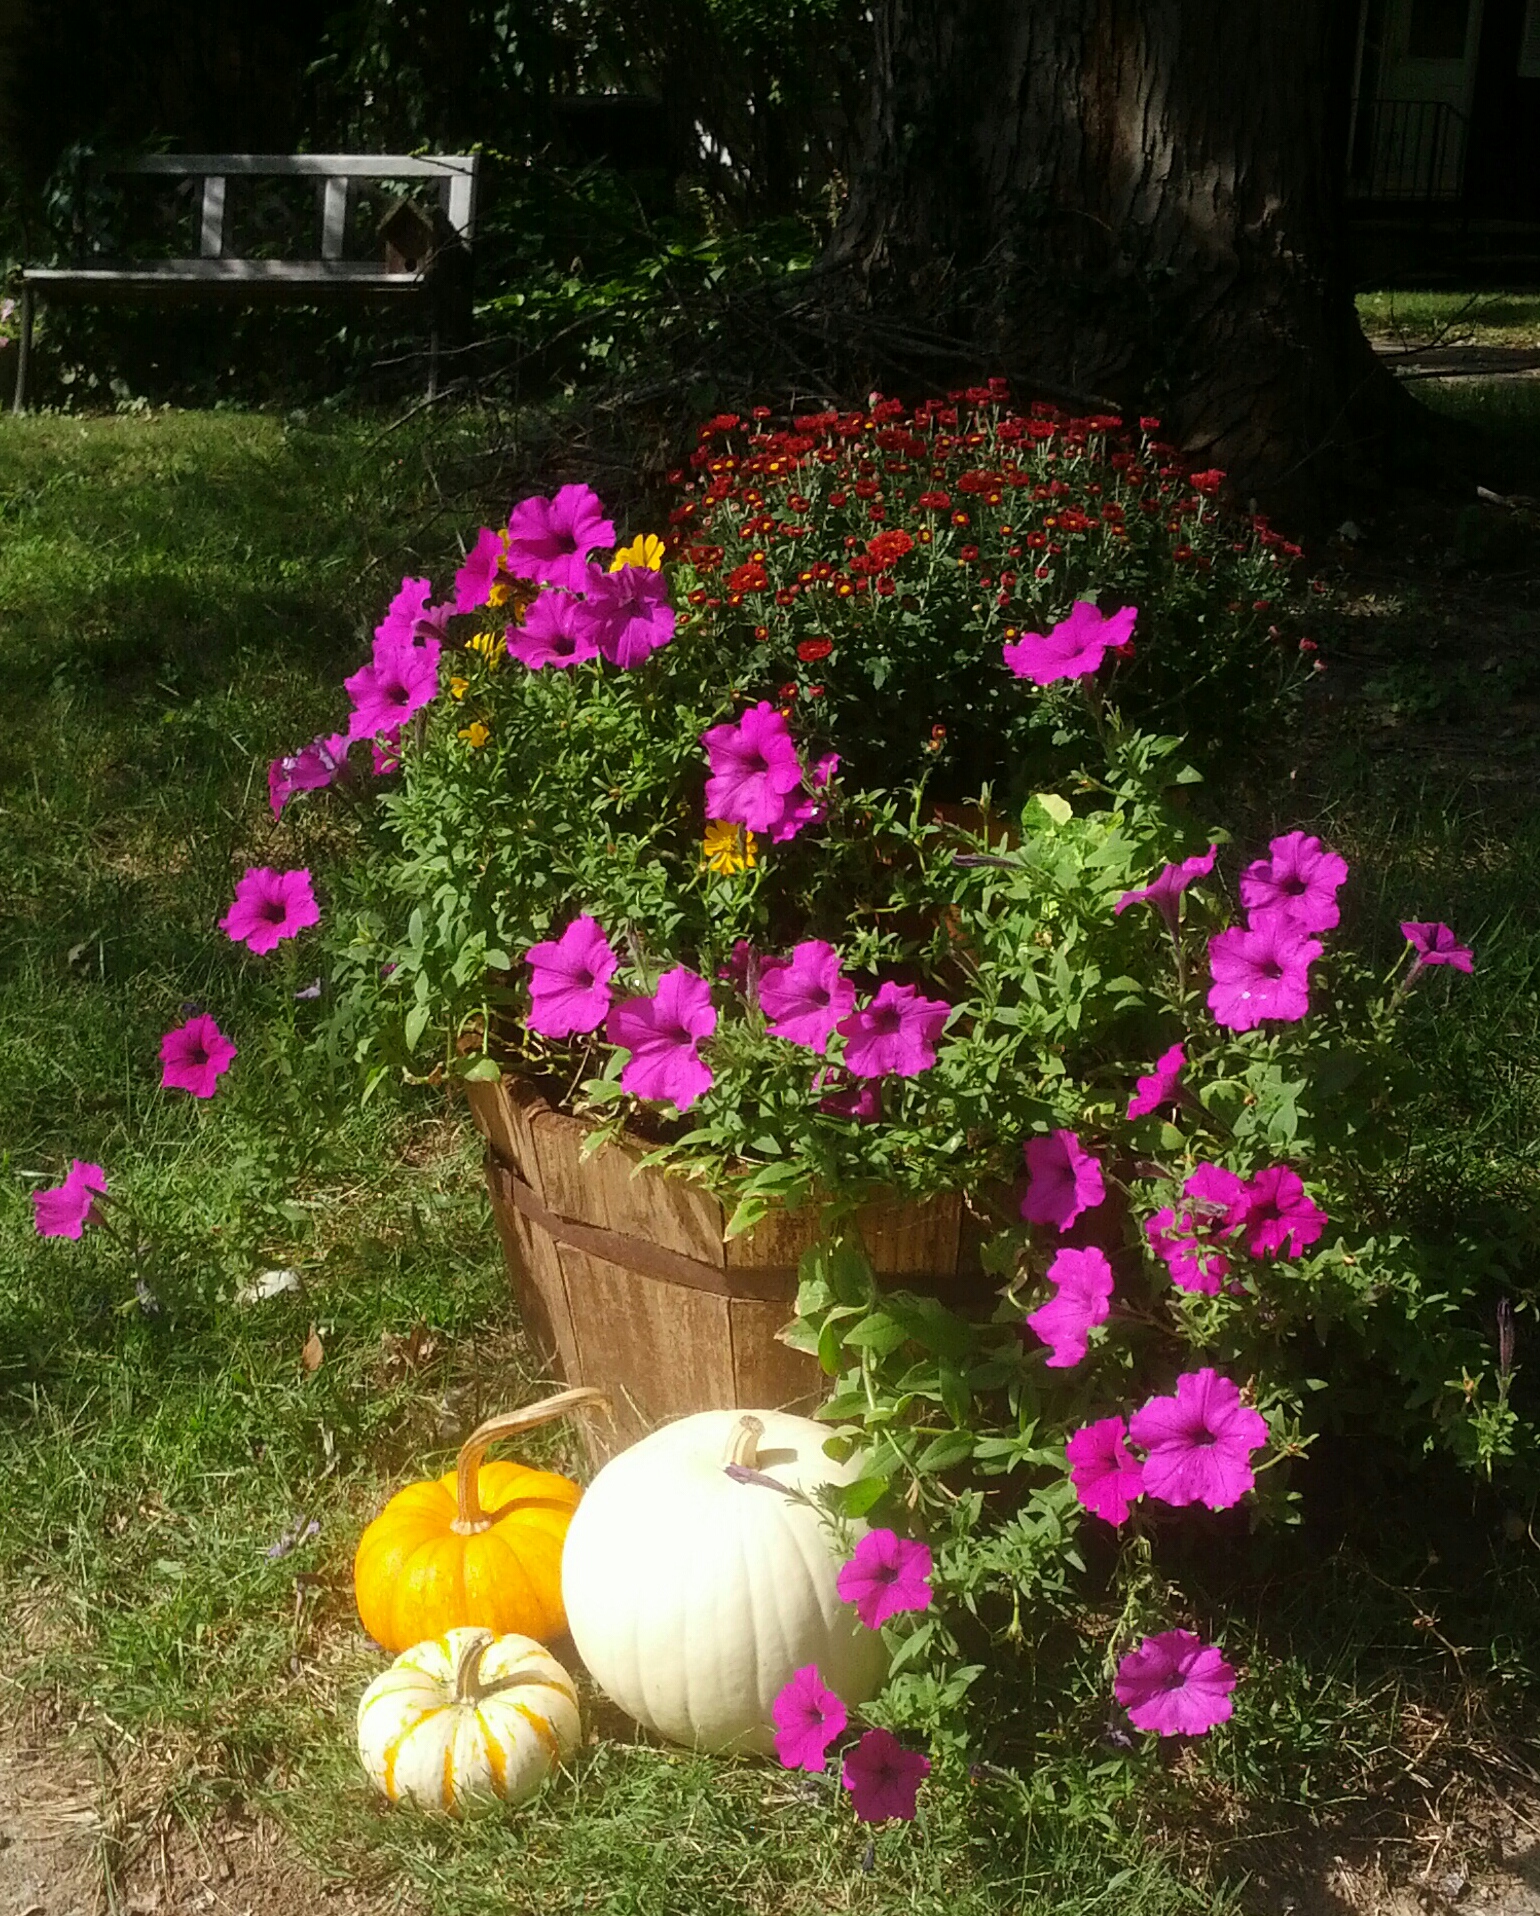 Fall cedar planter with purple petunias and red mums. Autumn flowers accented by white and orange pumpkins. Outdoor decorating. Country, cottage style rustic decor.